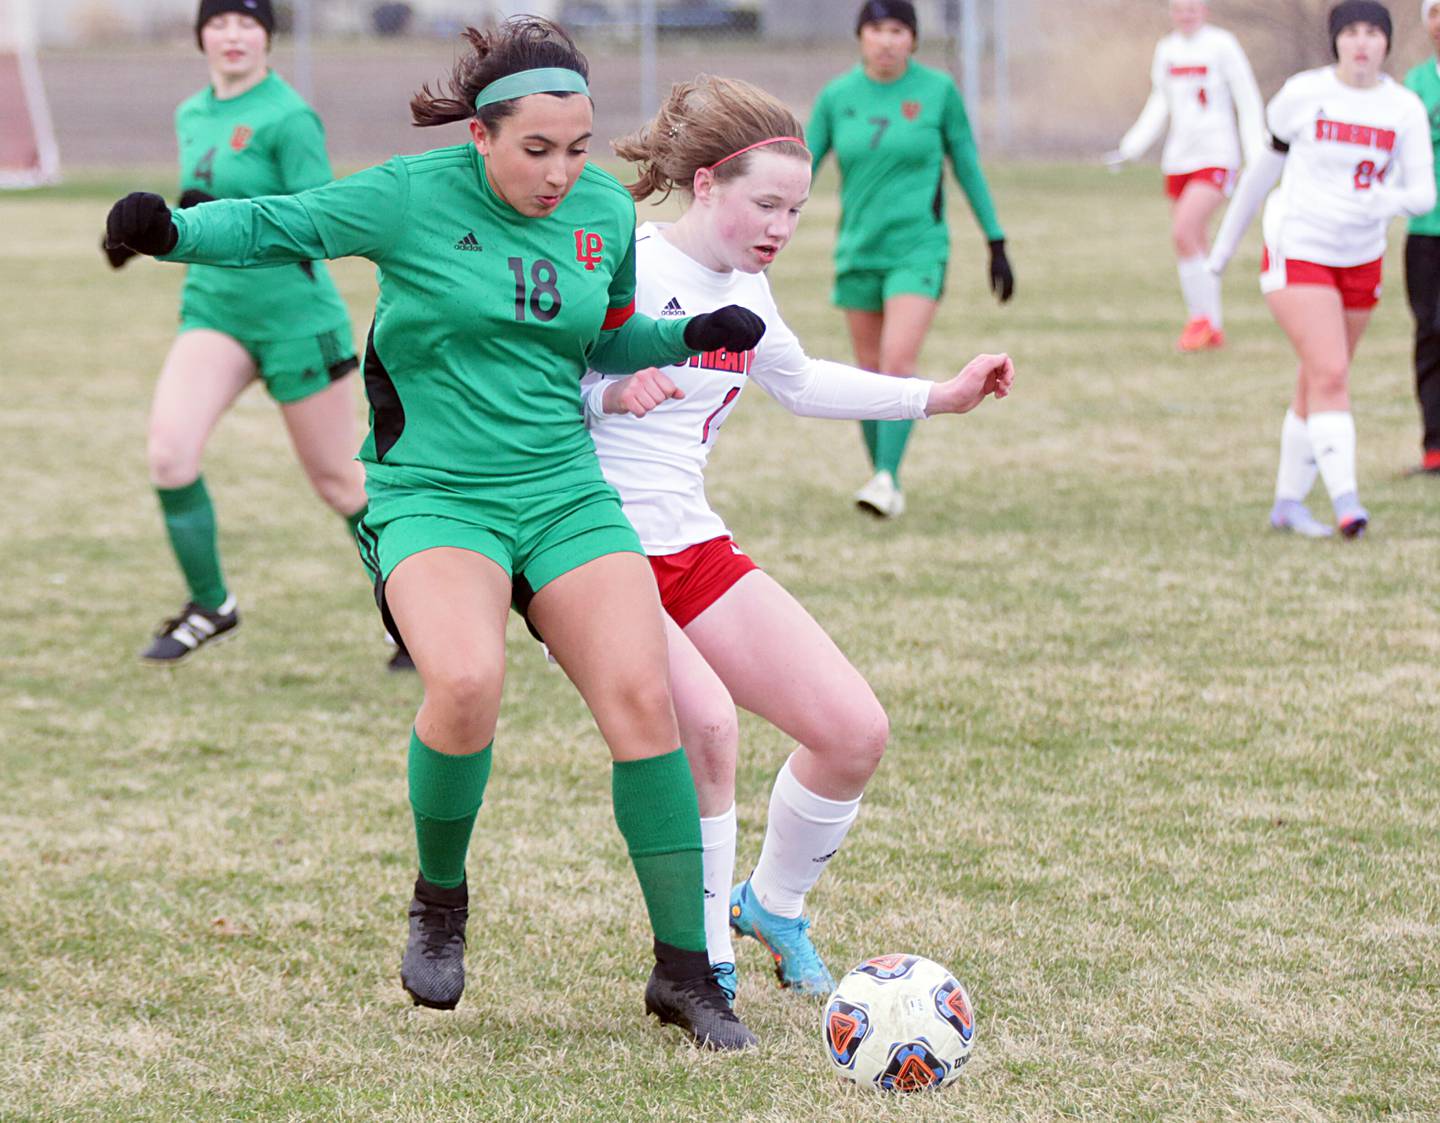 L-P's Analiyah Flores (18) and Streator's Bridget McGurk (14) compete for the ball during the teams' 2022 meeting.